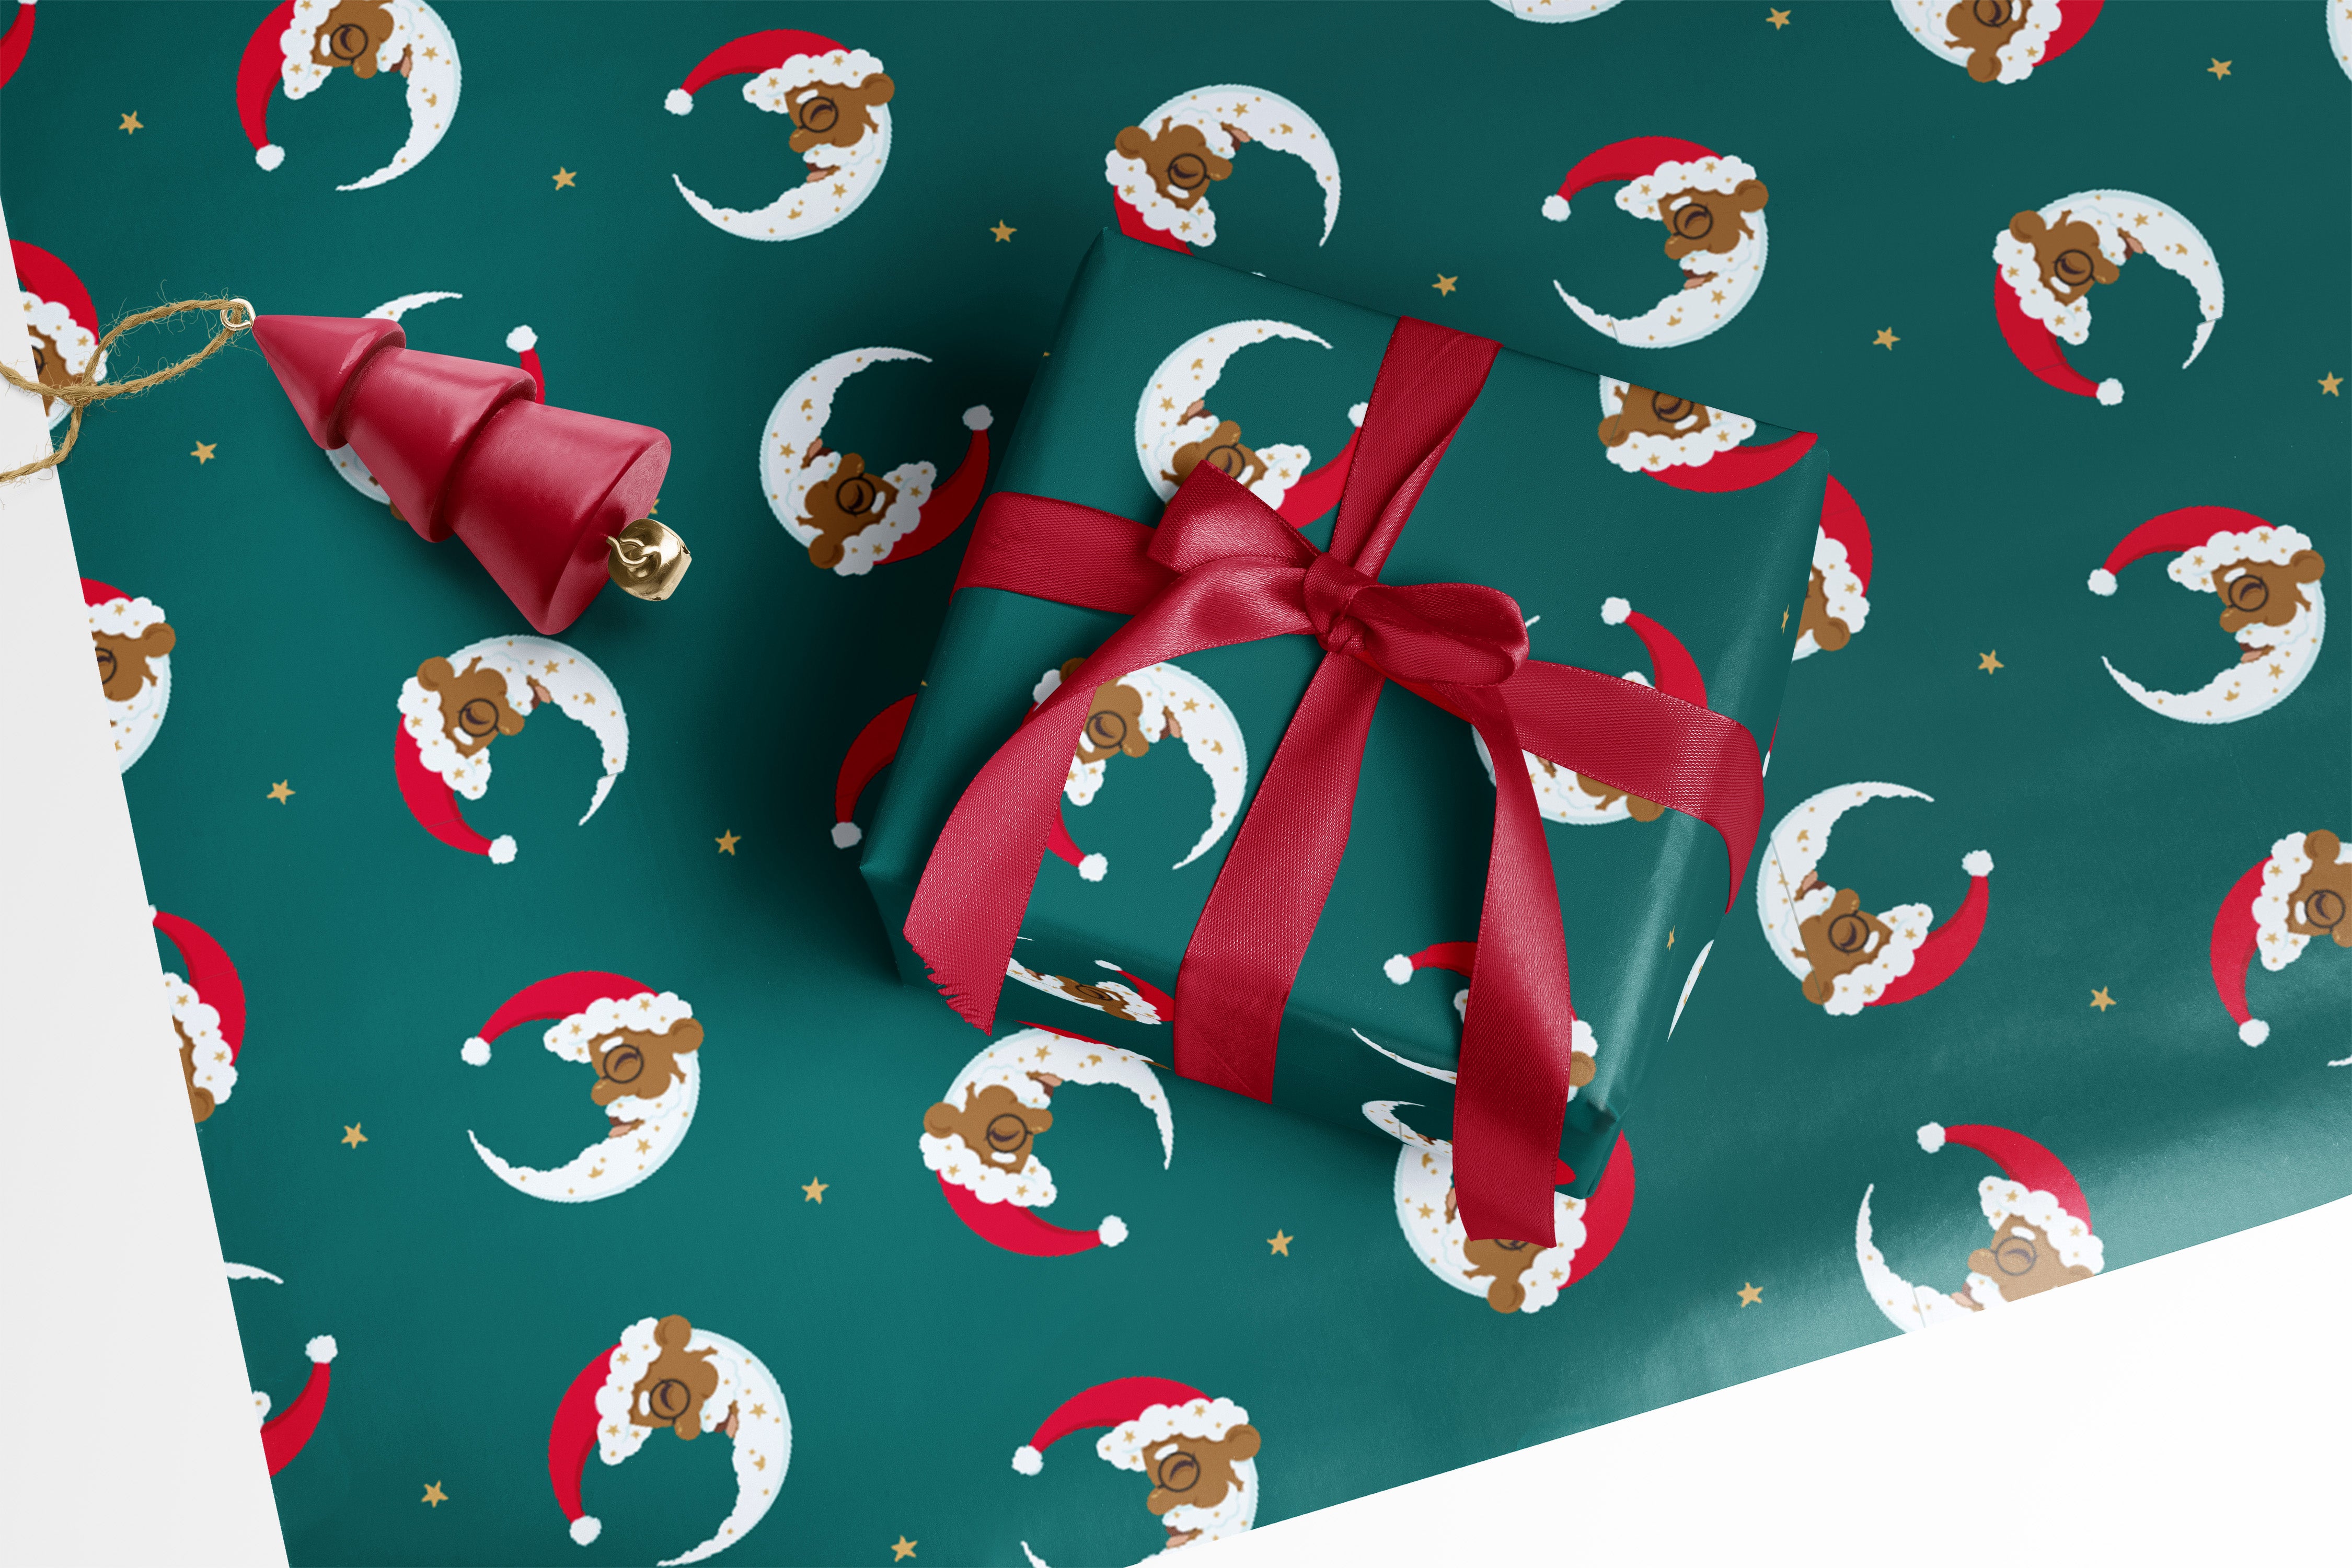 Shark Tank Bundle - 4 Pack Christmas Gift Wrap and Accessories